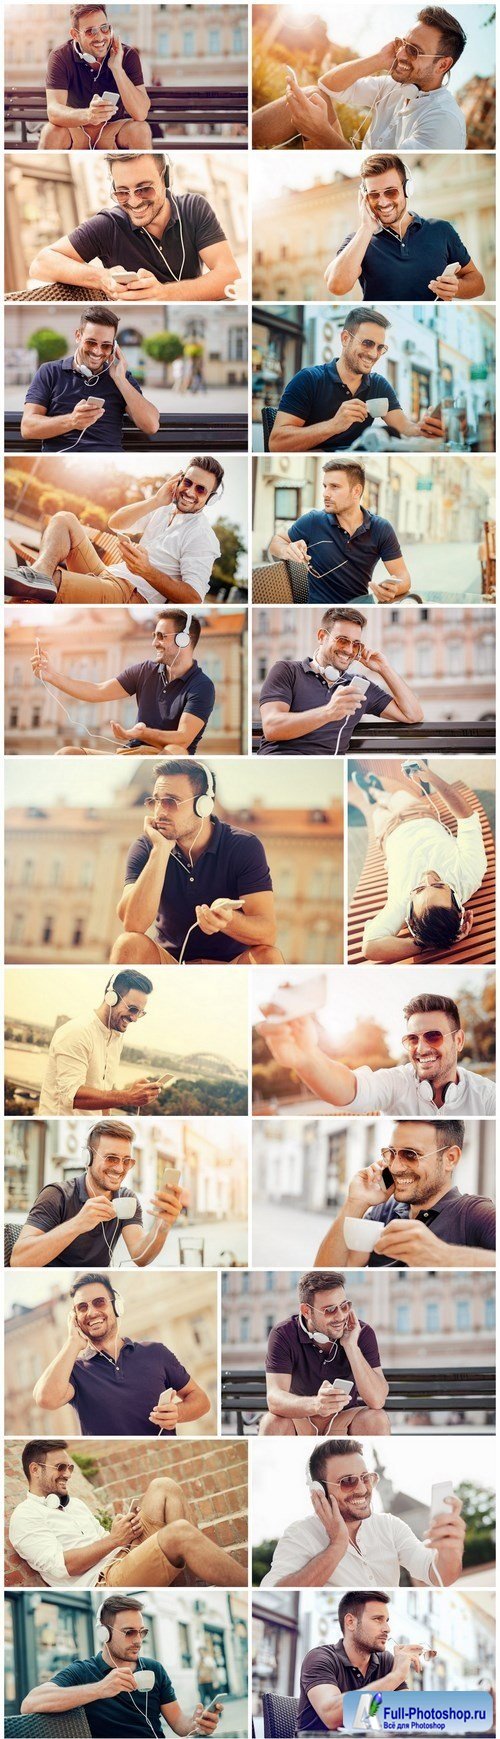 Smiling handsome guy listening to music - 24xUHQ JPEG Photo Stock